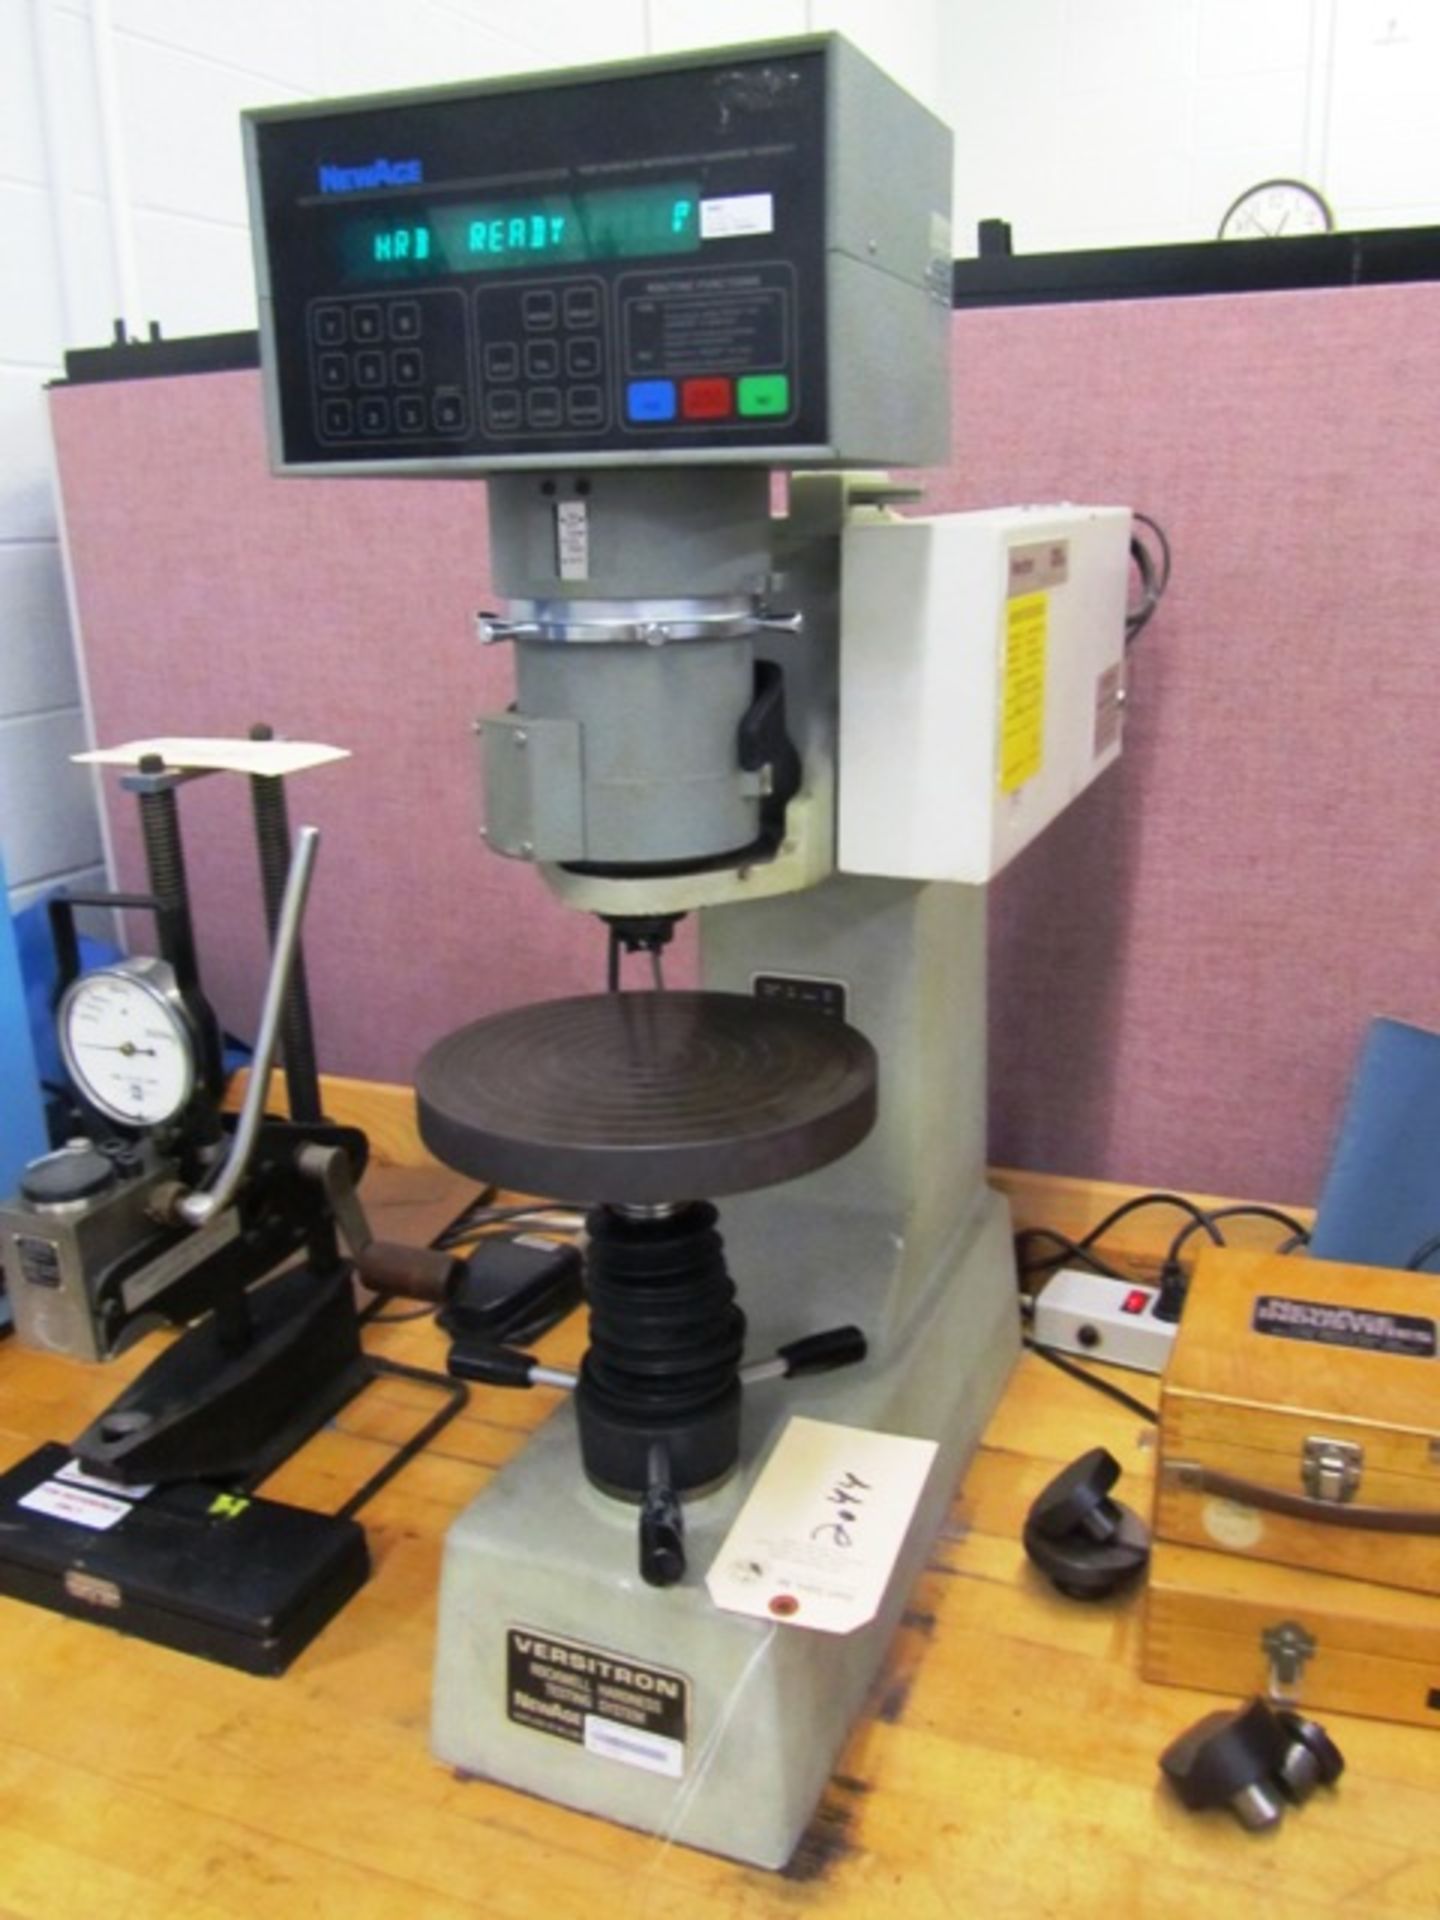 Versitron New Age Rockwell AT130-RDS Hardness Tester